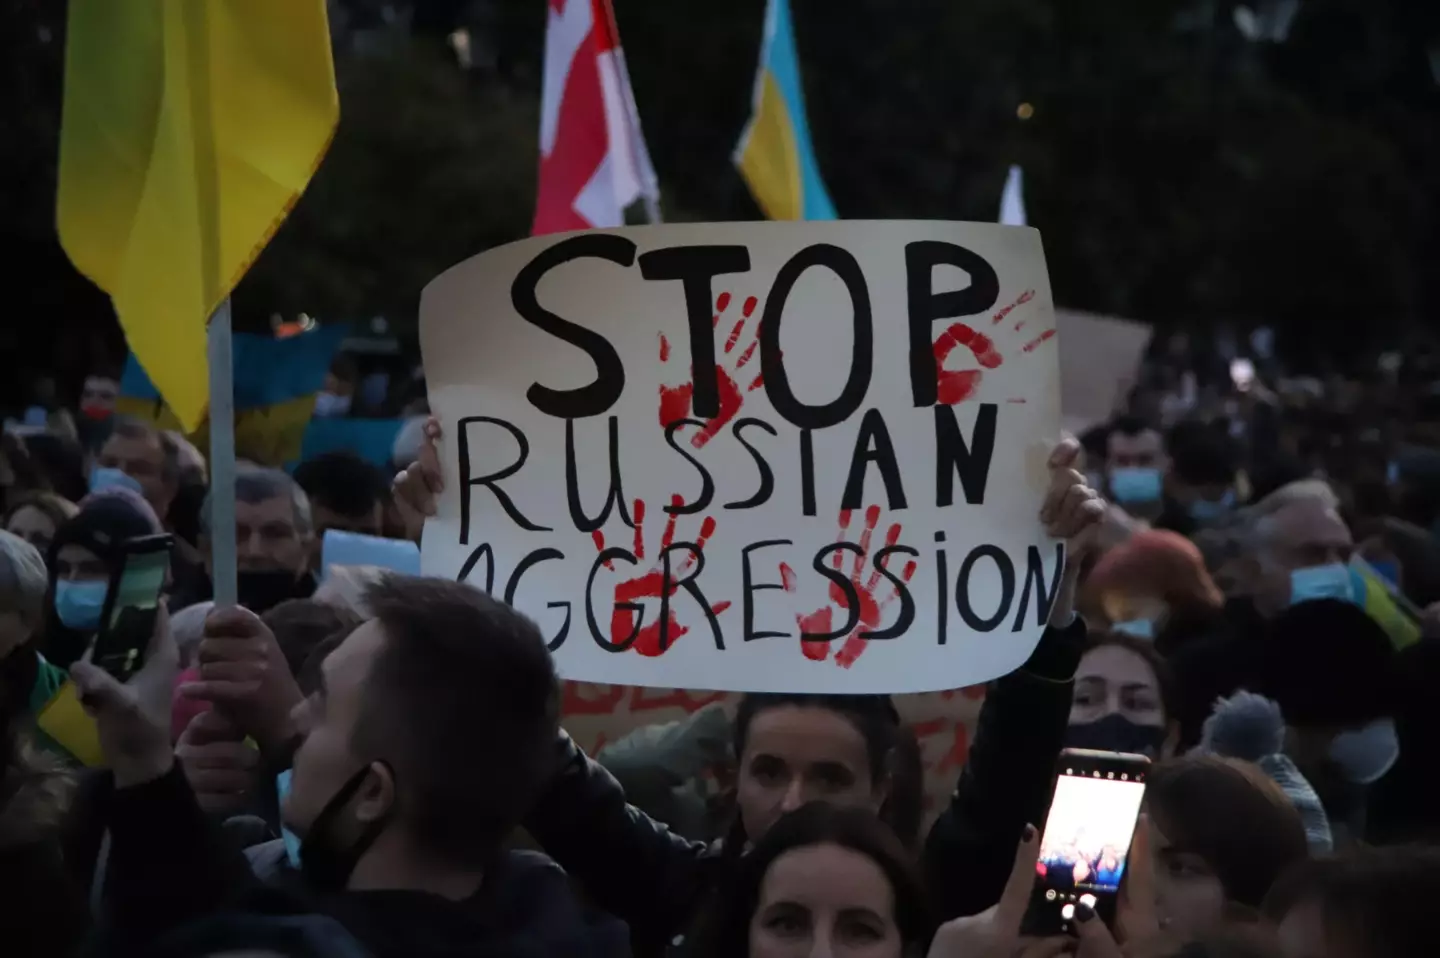 The rest of the world has seen protests in widespread support of Ukraine.